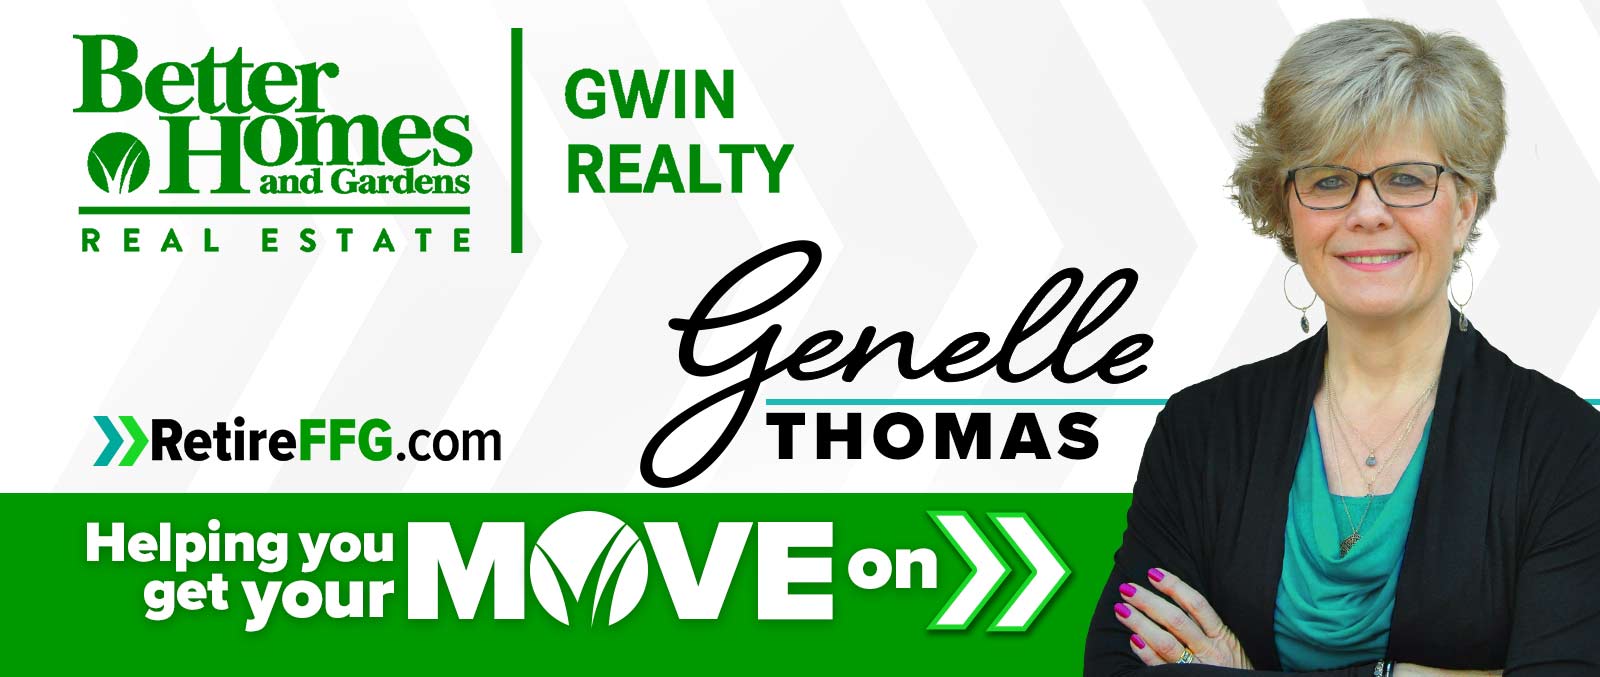 Genelle Thomas - Helping You Get Your Move On